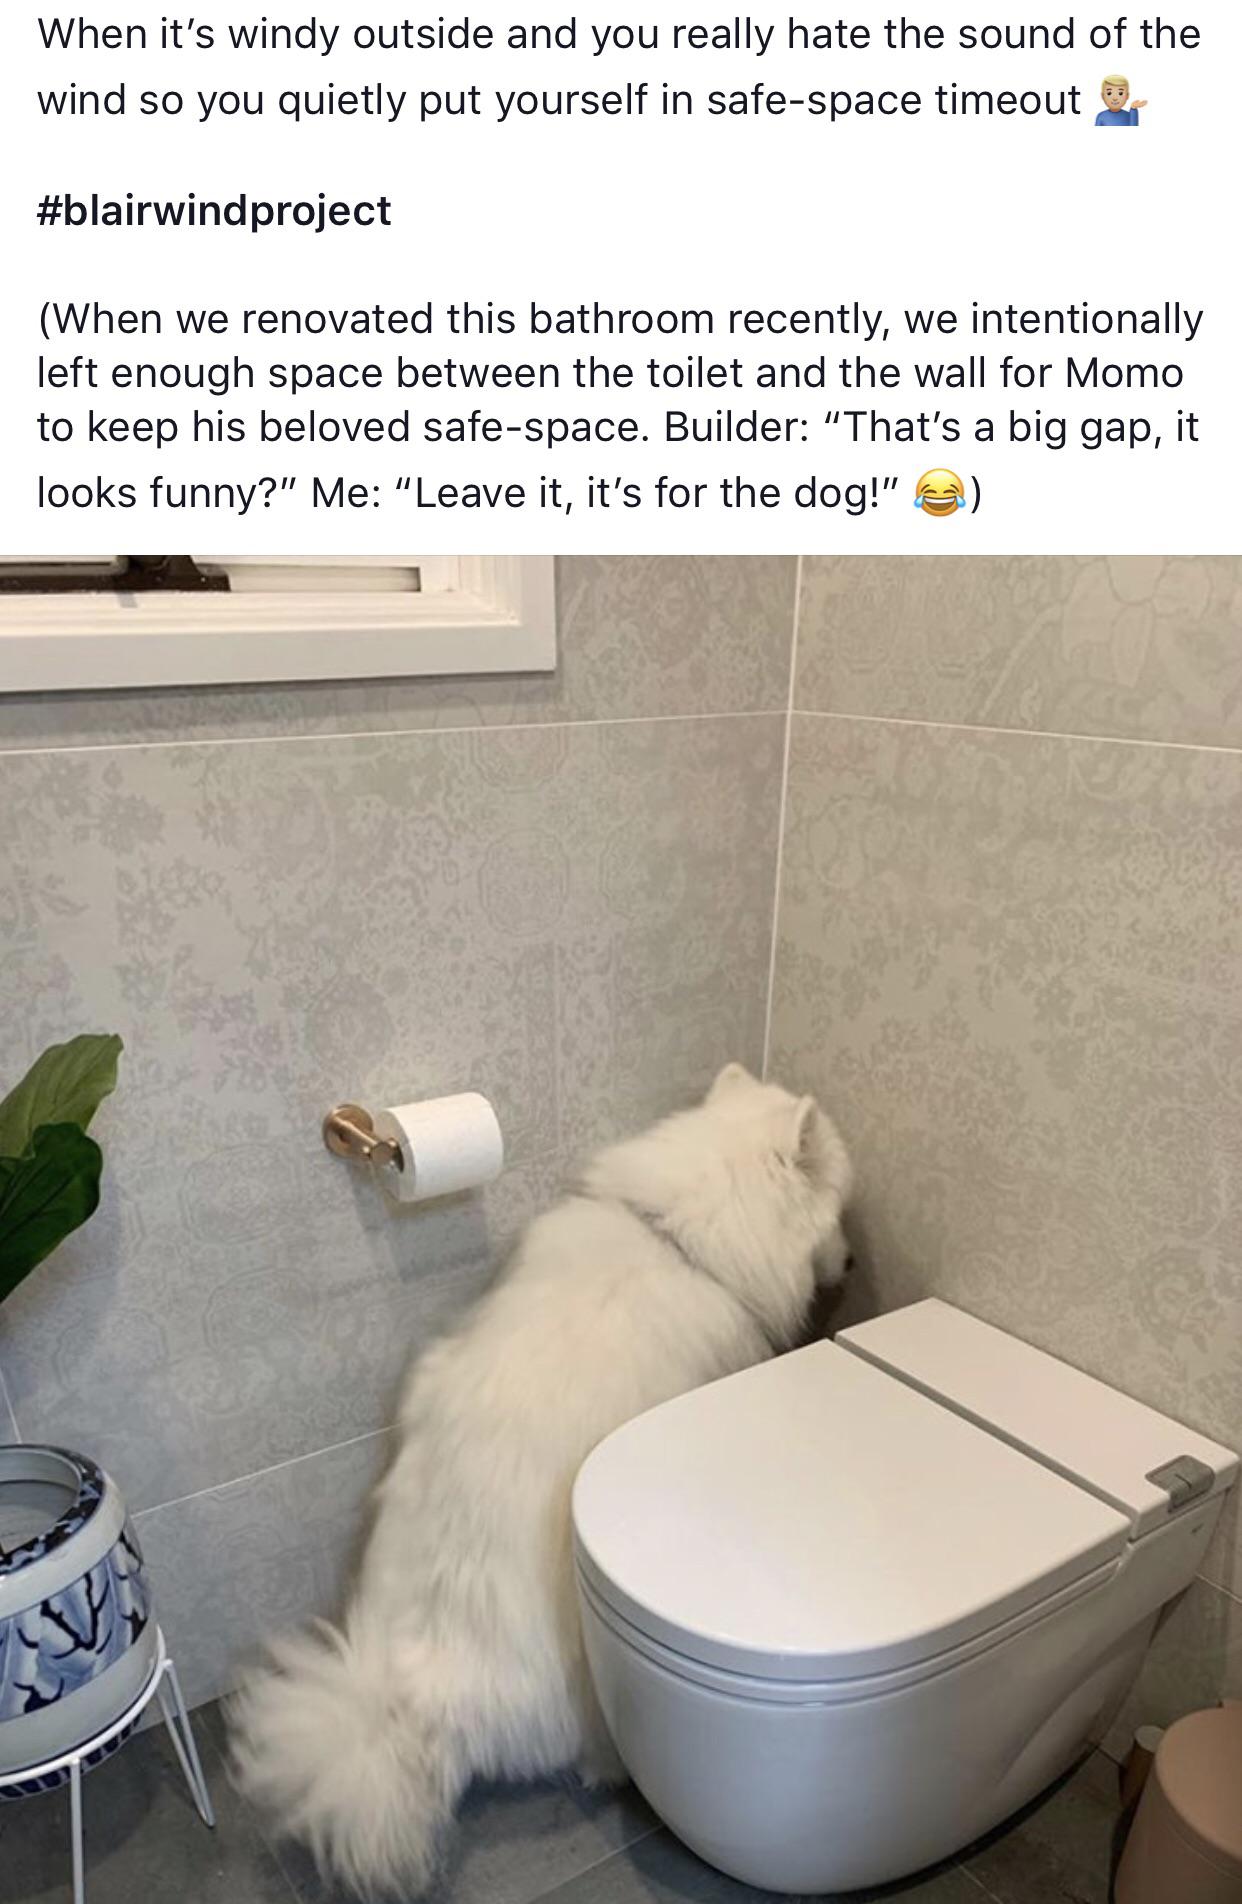 daily dose of randoms - floor - When it's windy outside and you really hate the sound of the wind so you quietly put yourself in safespace timeout When we renovated this bathroom recently, we intentionally left enough space between the toilet and the wall